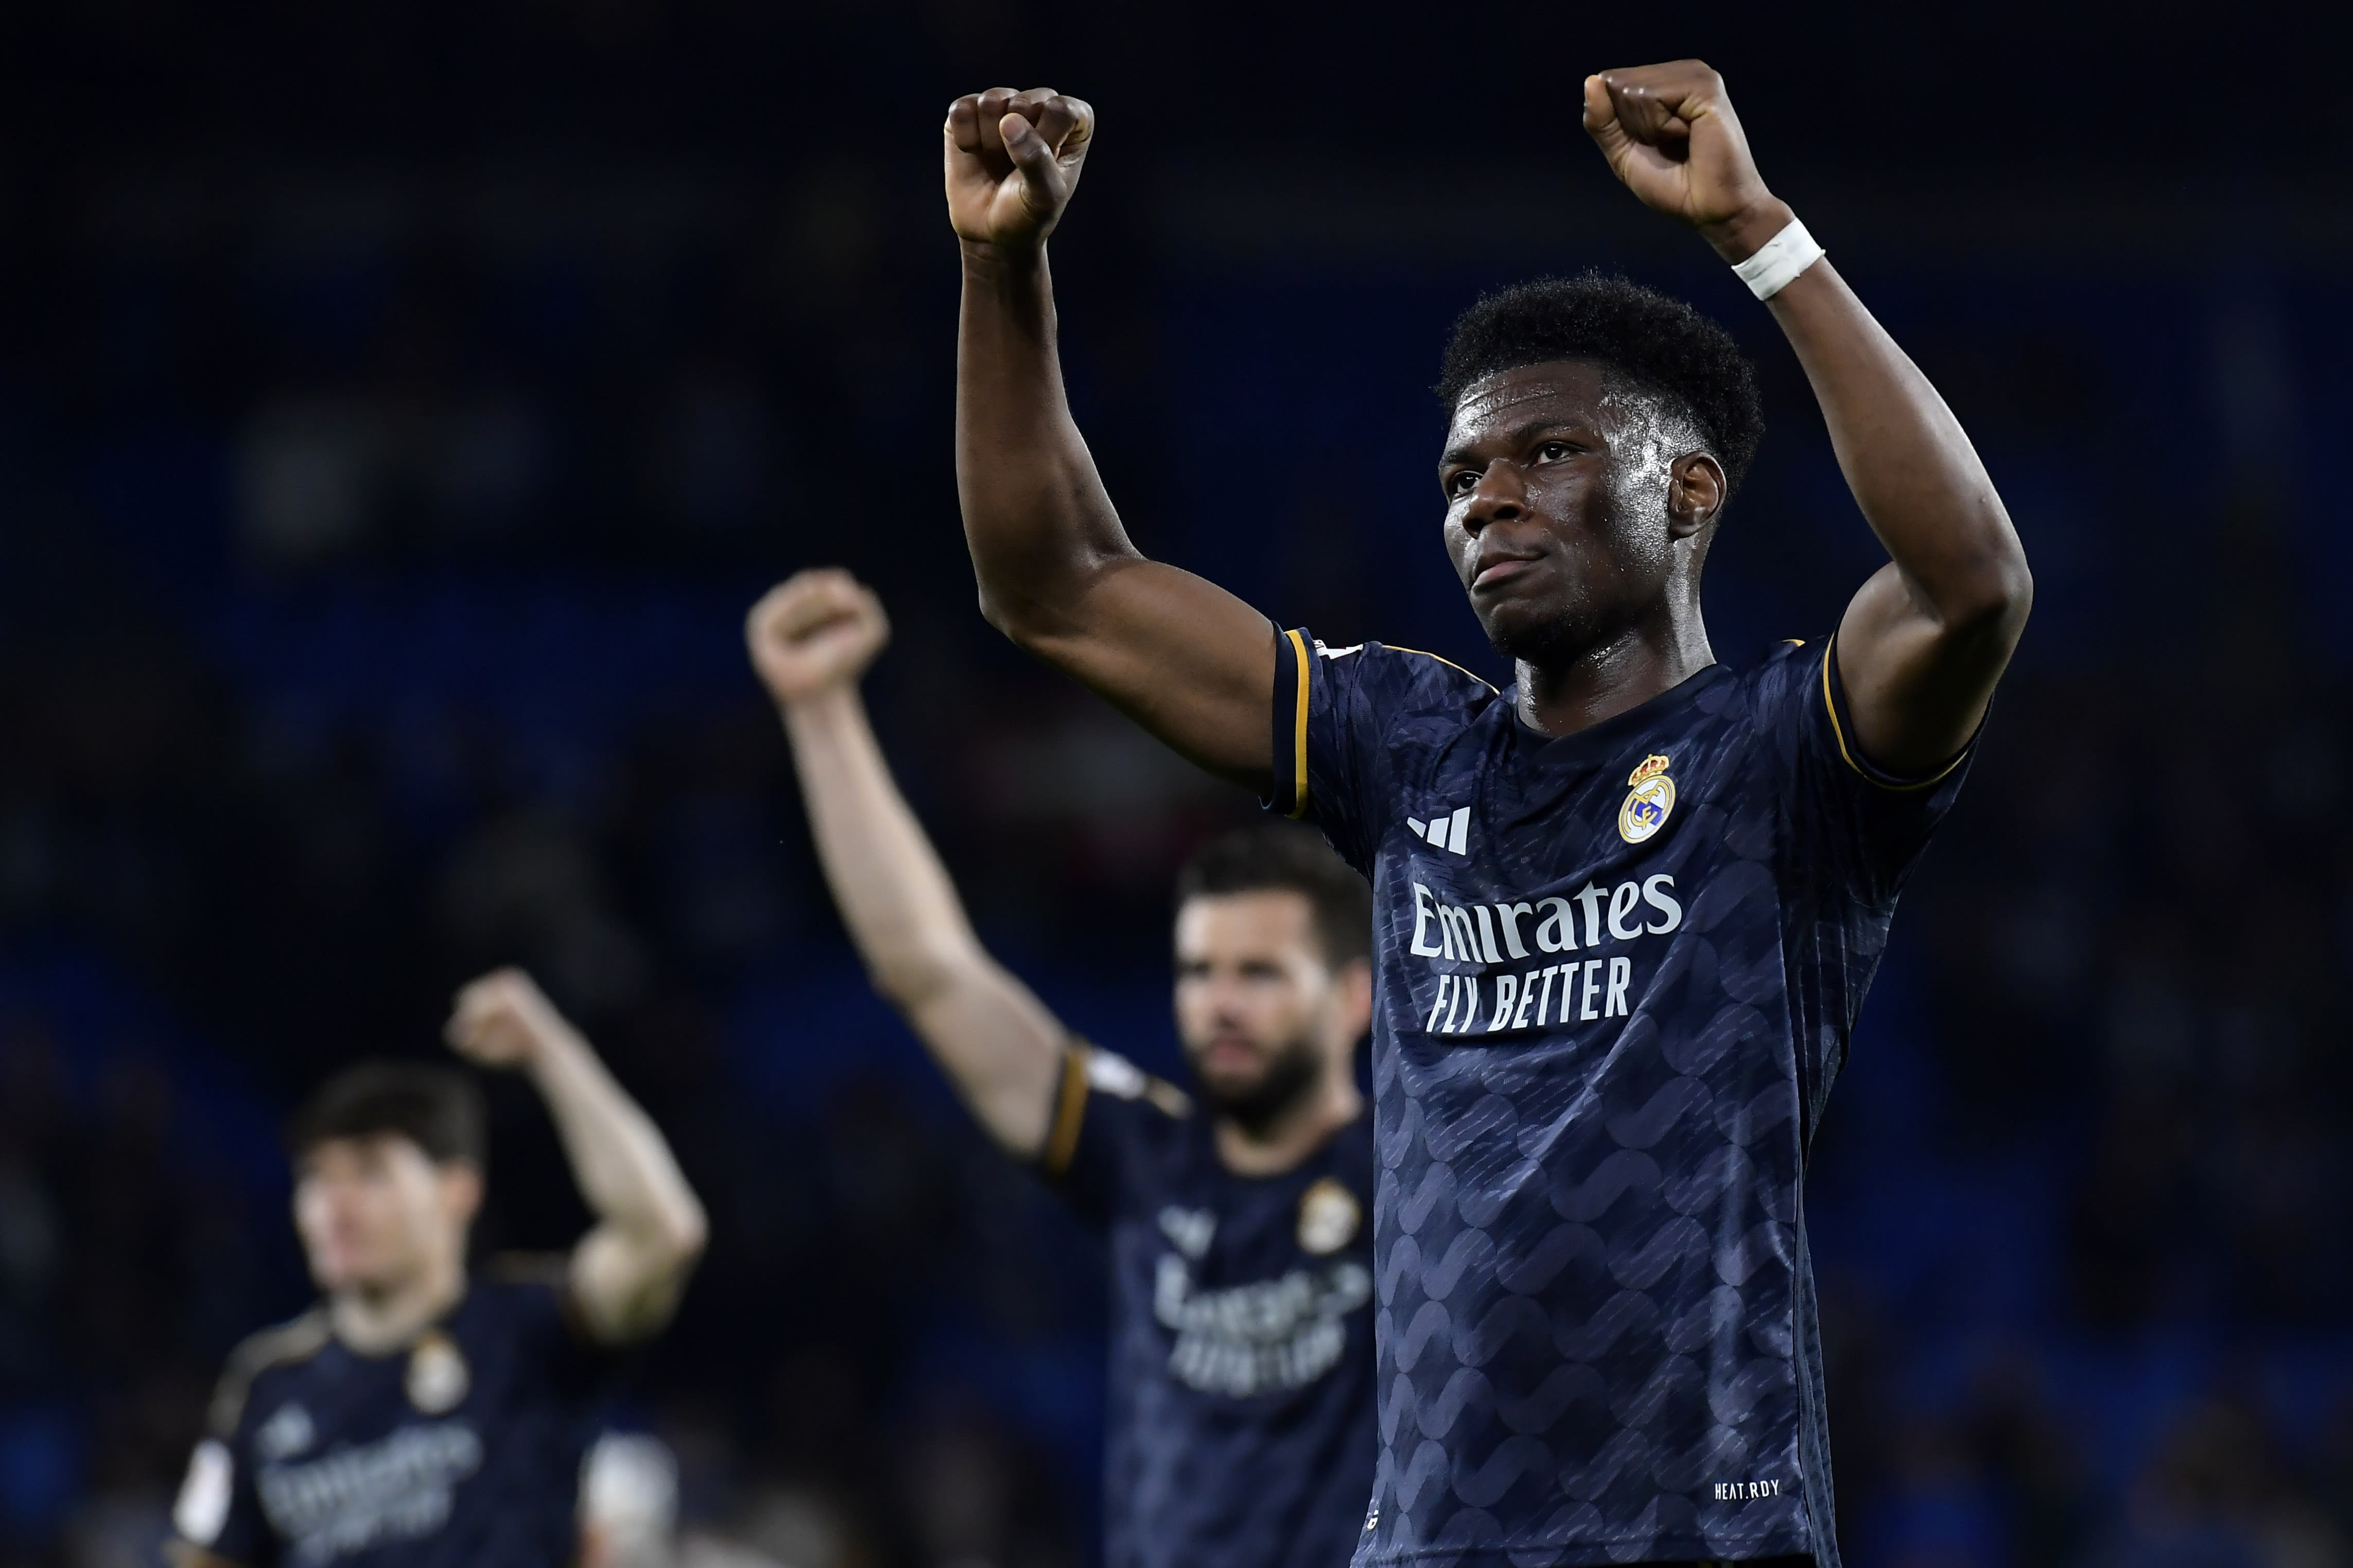 Real Madrid midfielder Tchouaméni to miss Champions League final with foot injury